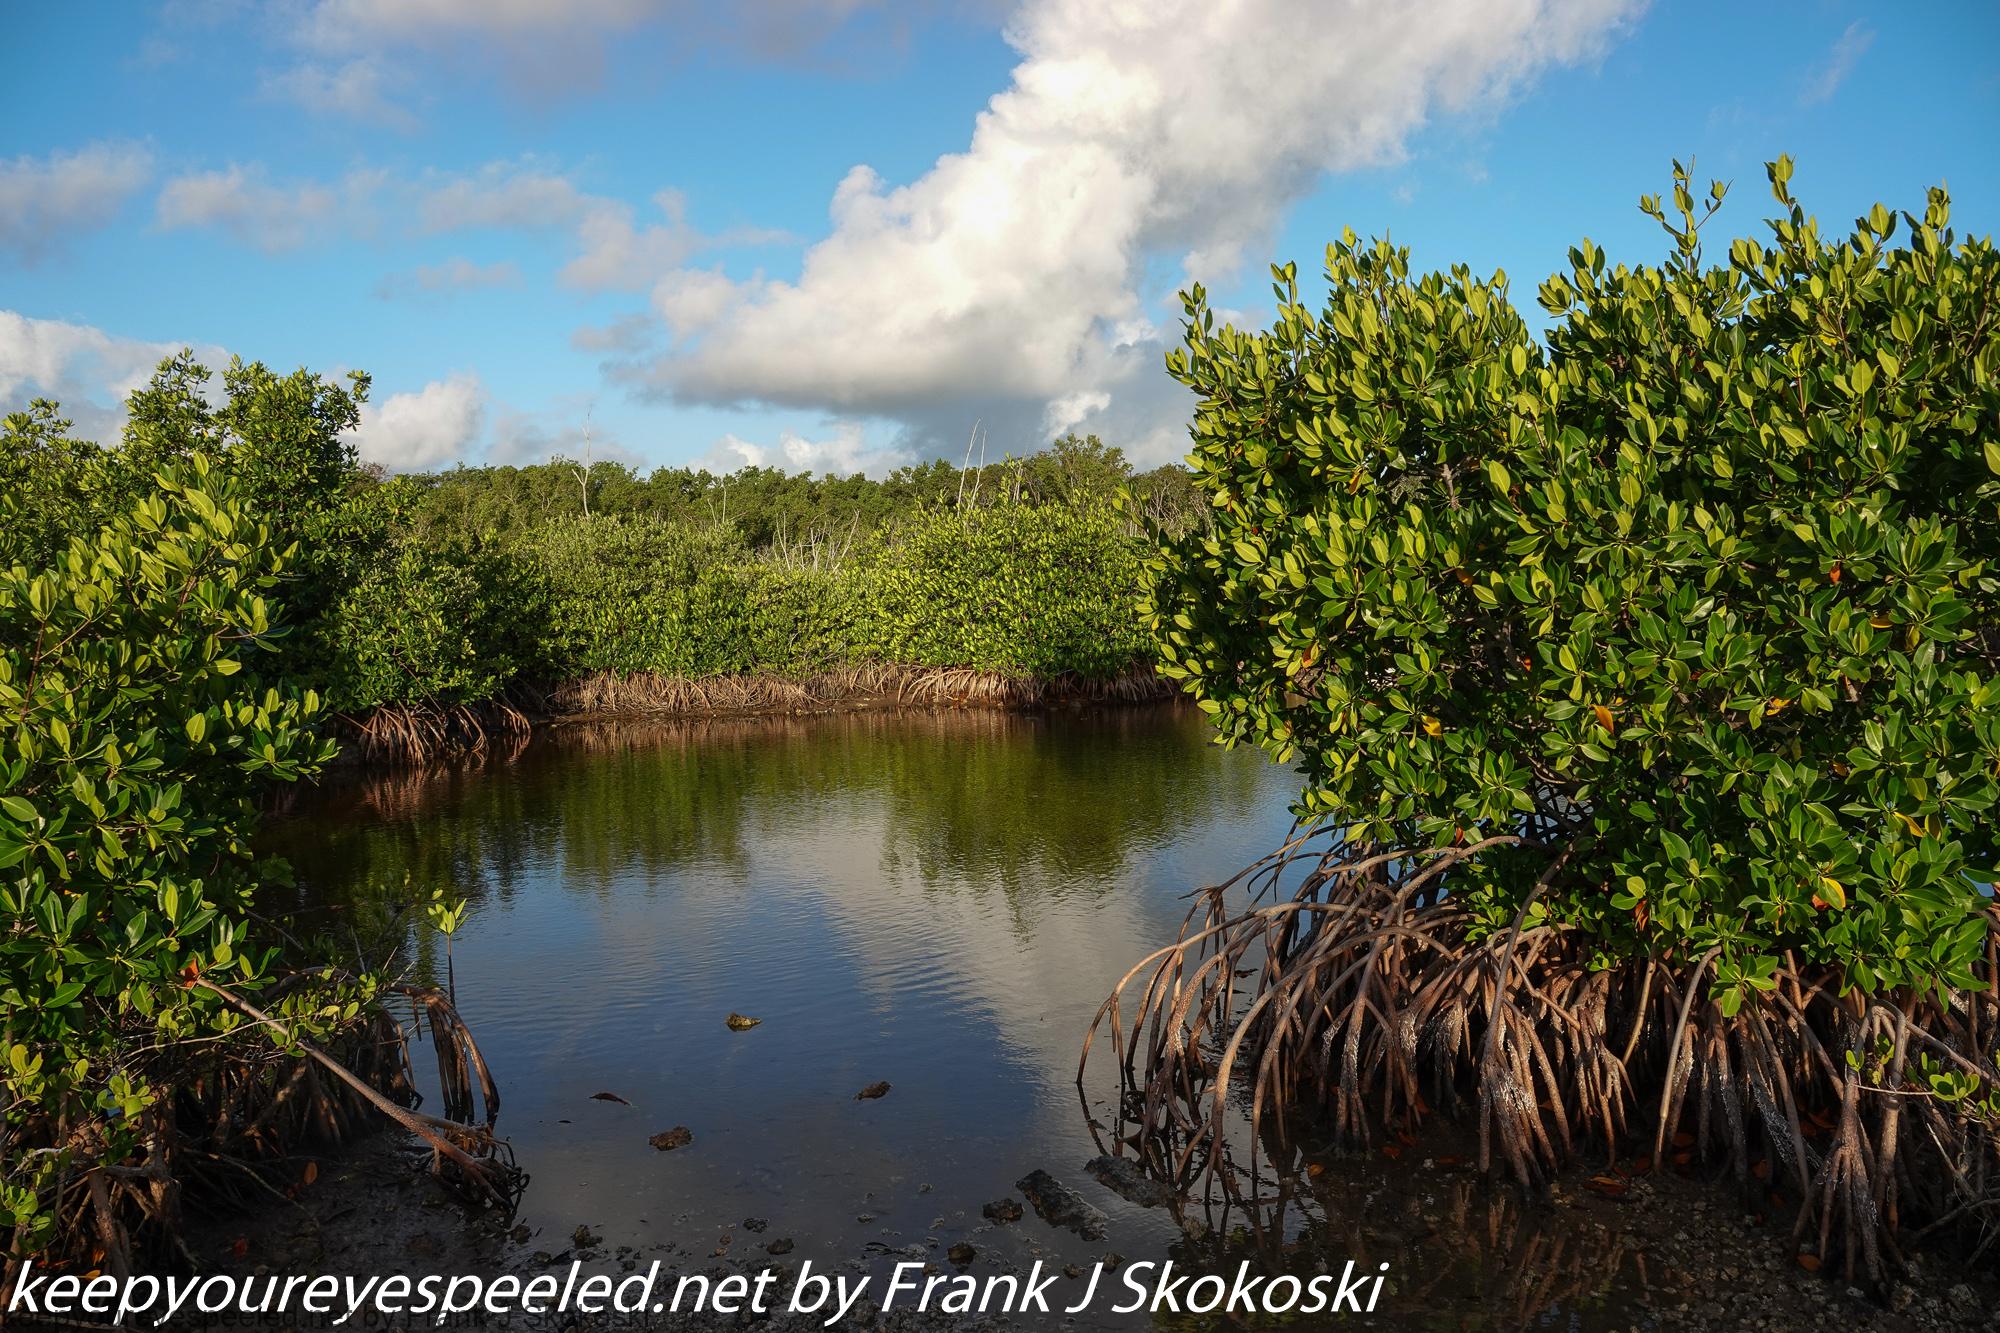 Florida: Key Largo. My Last Hikes In The Hardwood Hammock And Mangrove  Forests - Keep Your Eyes Peeled